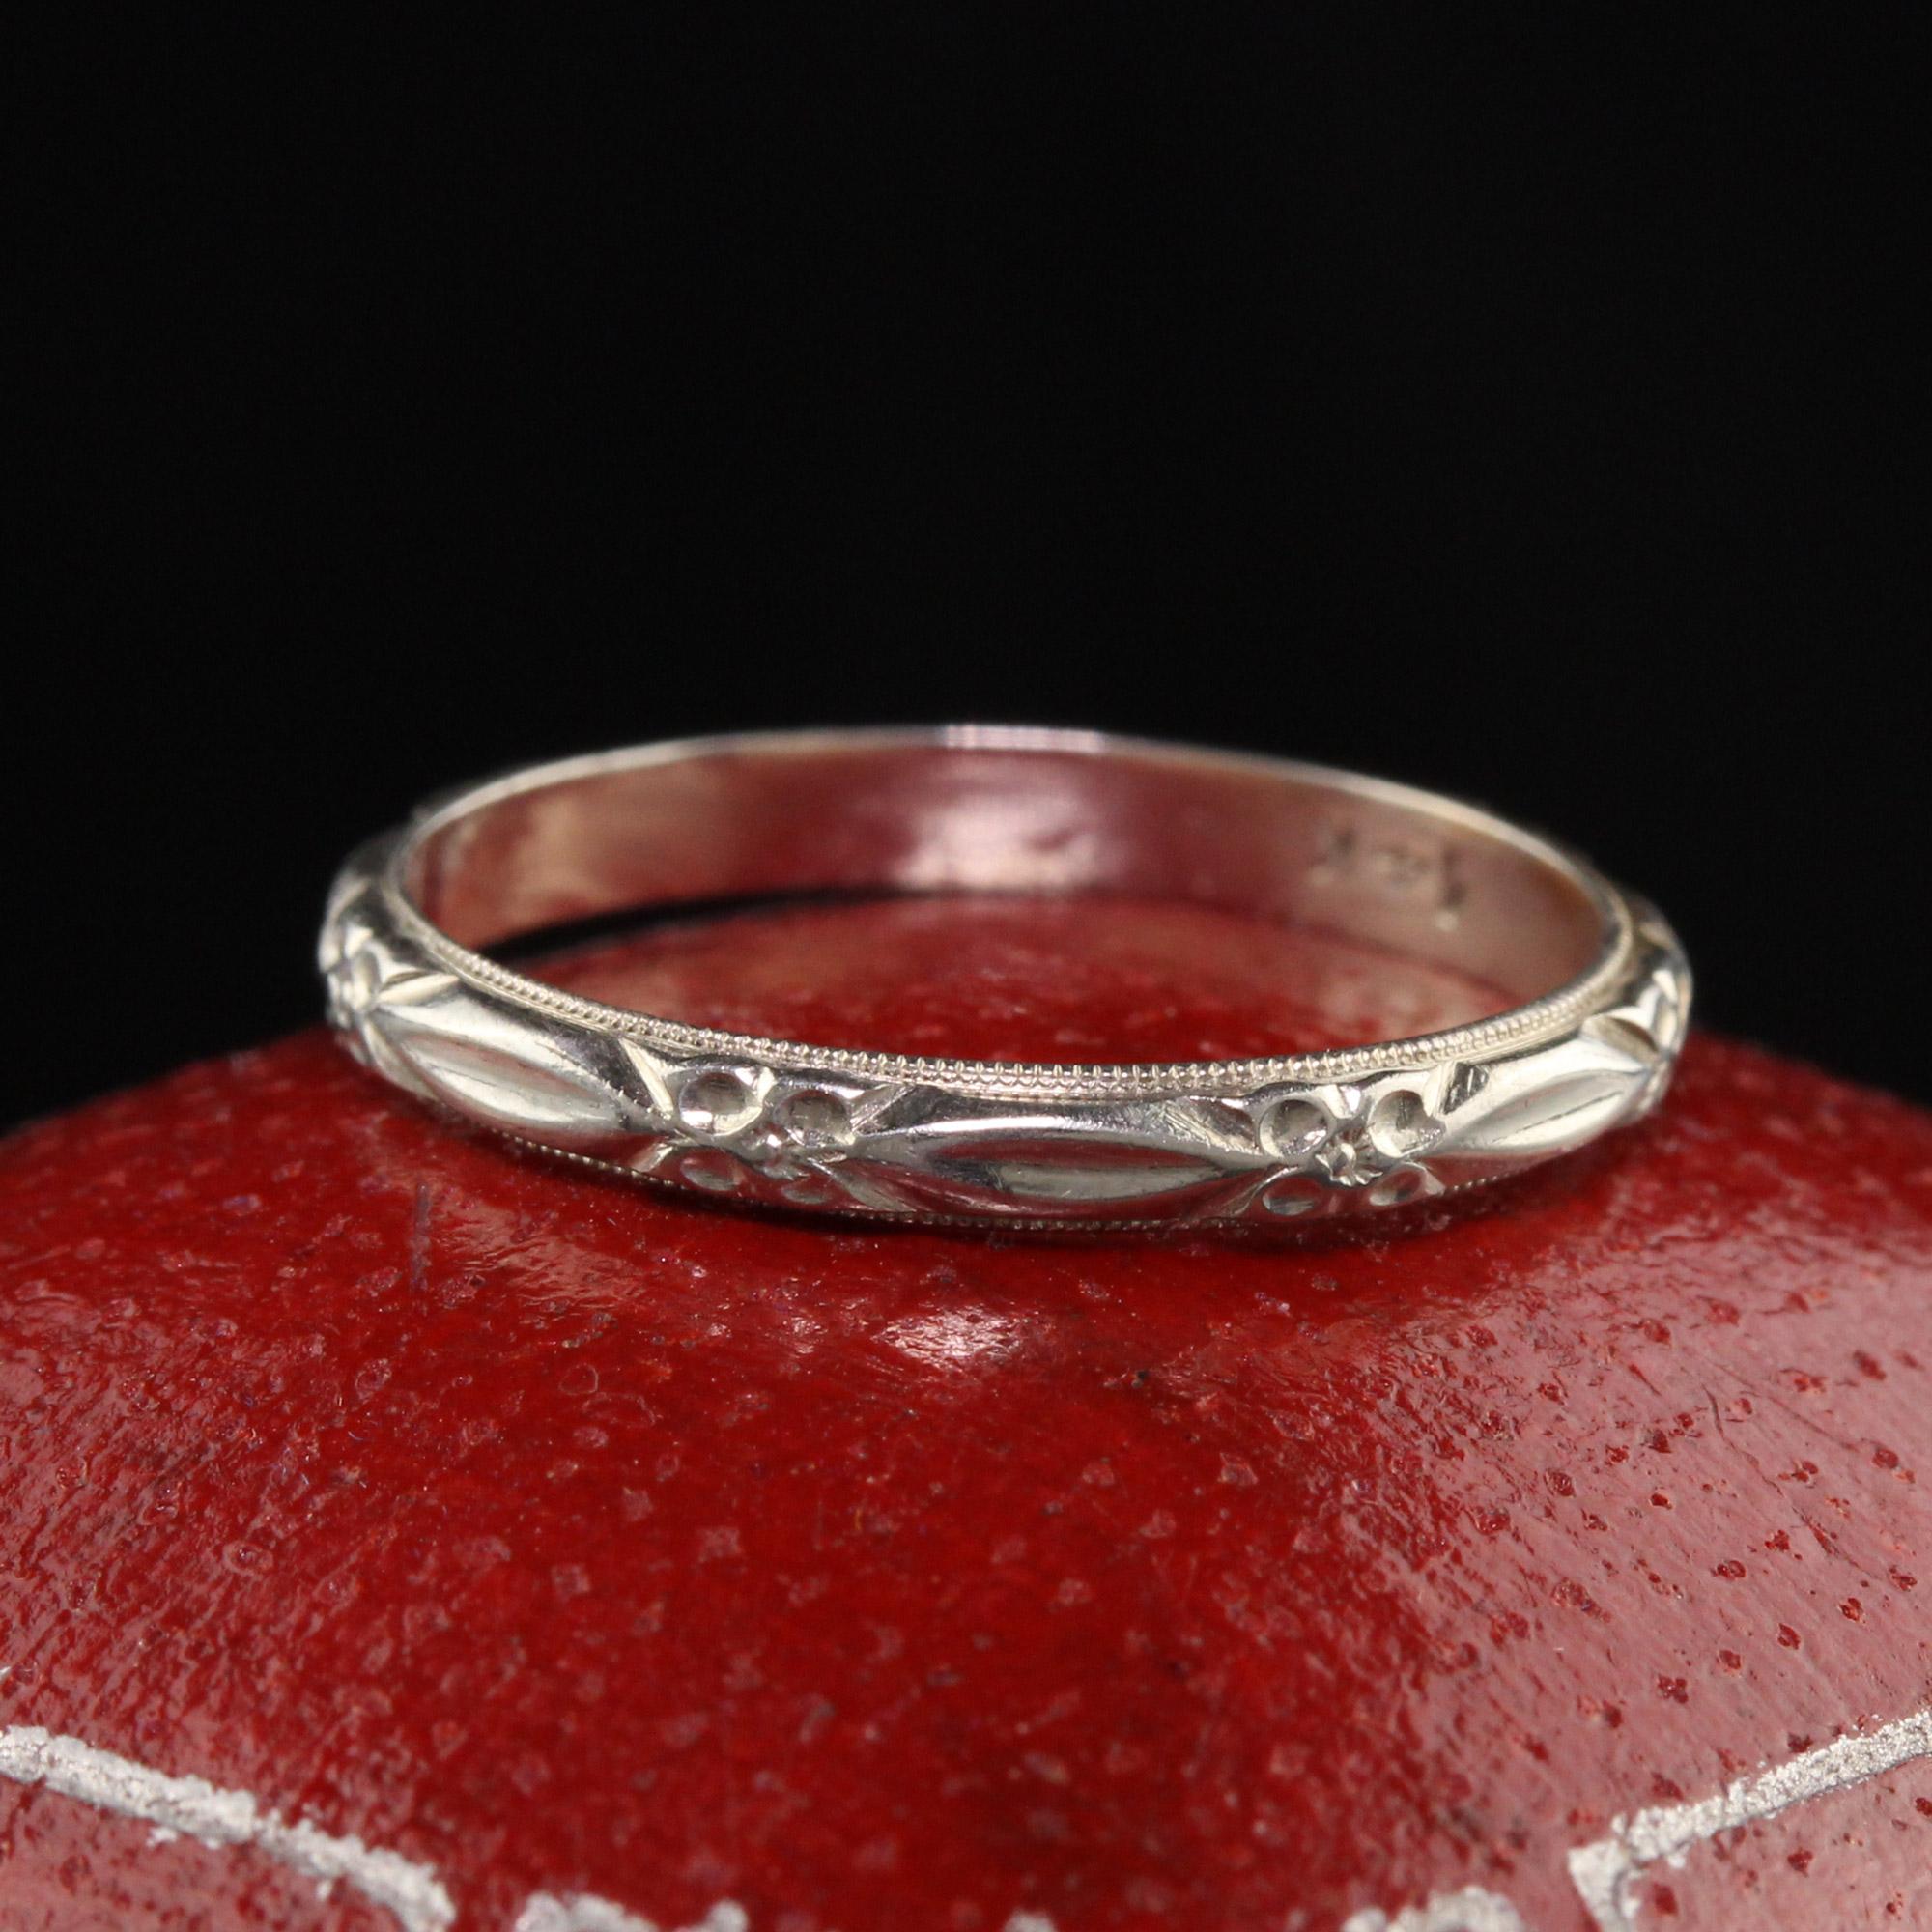 Beautiful Antique Art Deco 14K White Gold Engraved Wedding Band - Size 5 1/4. This beautiful band is deeply engraved on the entire band and is in great condition.

Item #R0973

Metal: 14K White Gold

Weight: 1.2 Grams

Ring Size: 5